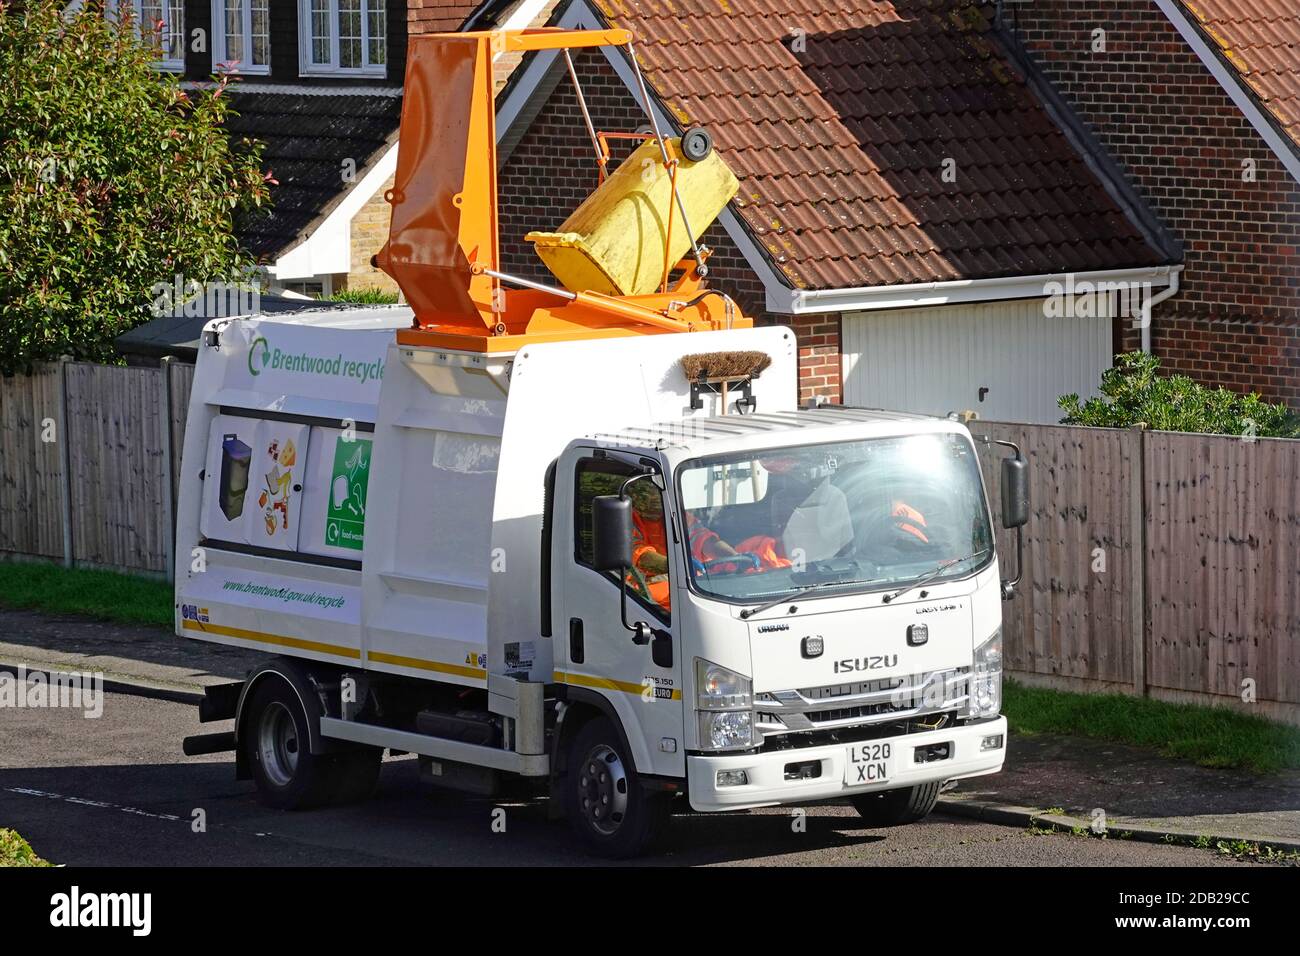 Isuzu urban lorry truck fitted with roof access for hydraulic lift to tip wheelie bin collection of household caddy food waste recycling Brentwood UK Stock Photo